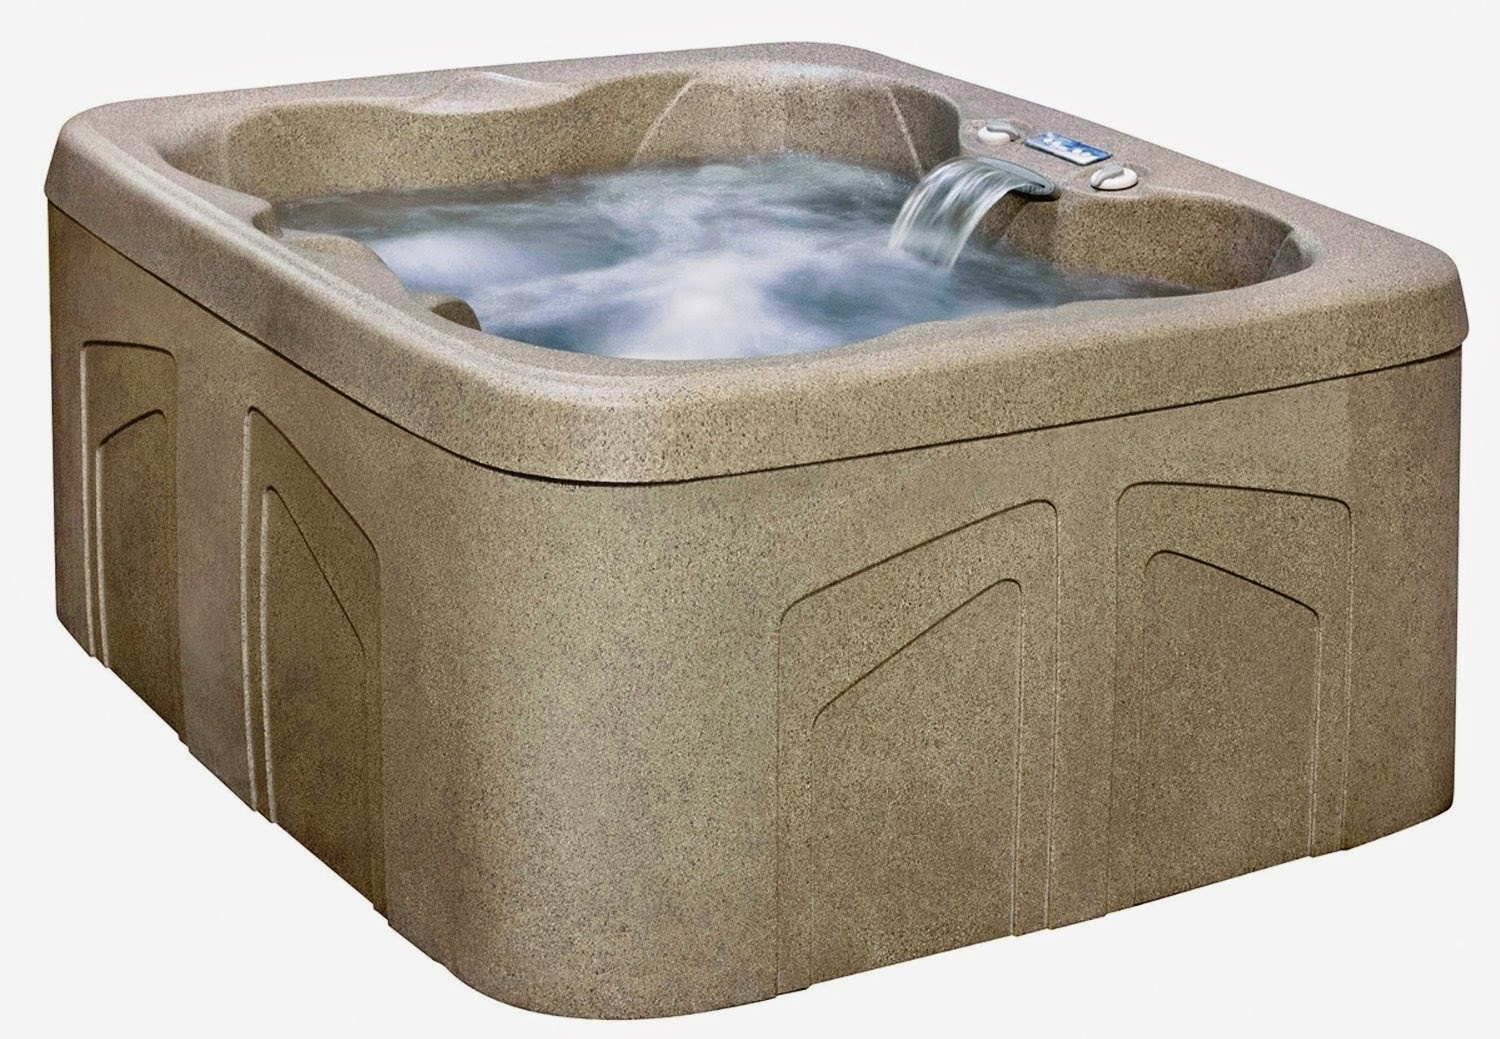 The rock 3 4 person hot tub